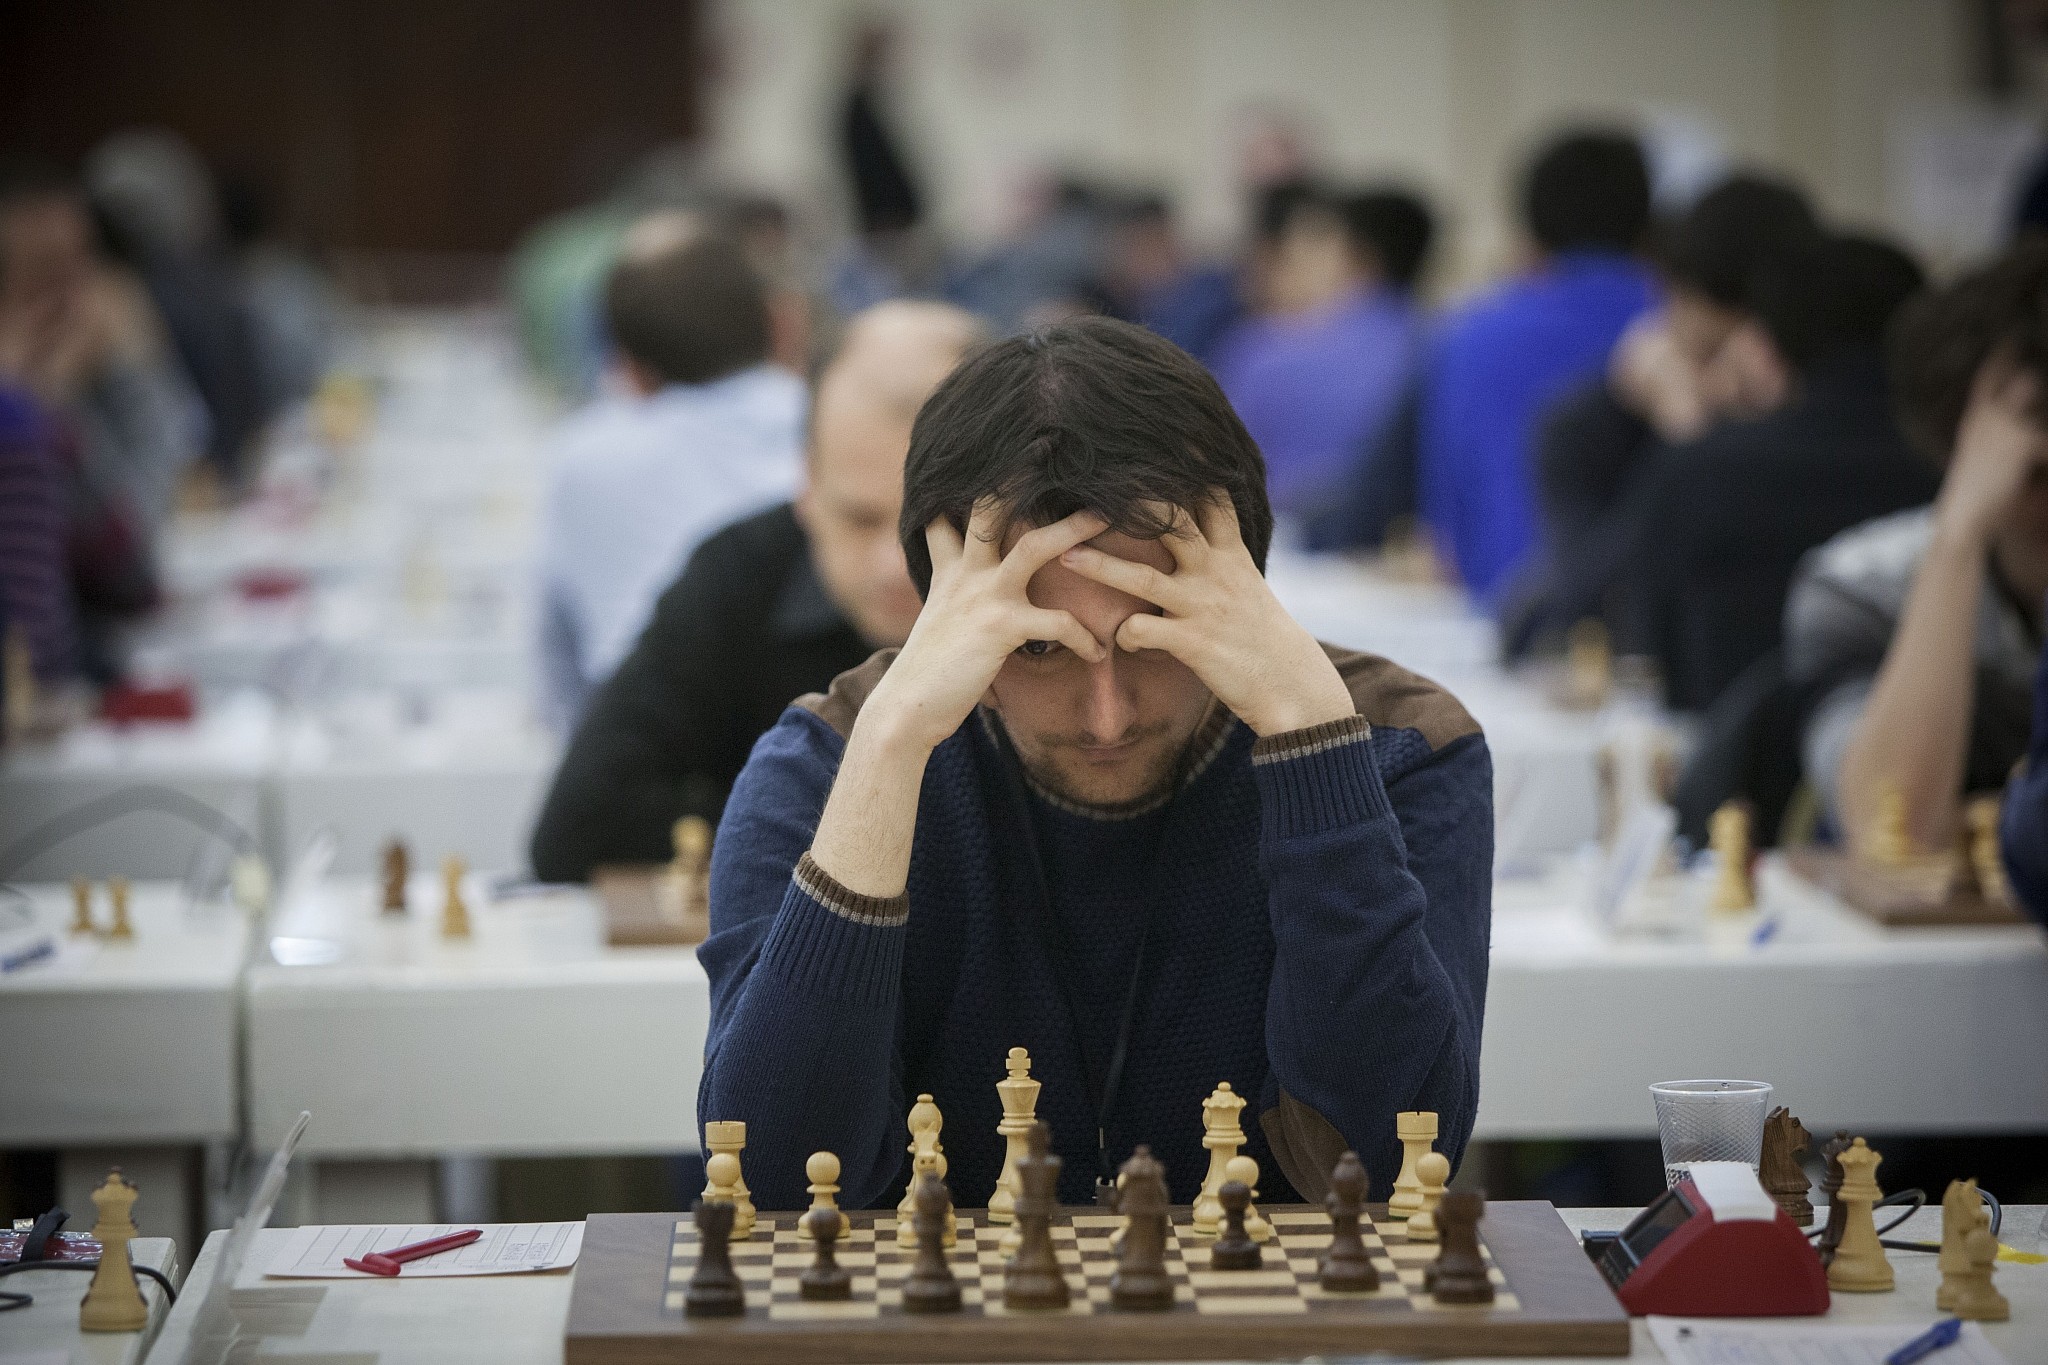 Elite world chess event begins in Israel, as organizers seek opening for  more